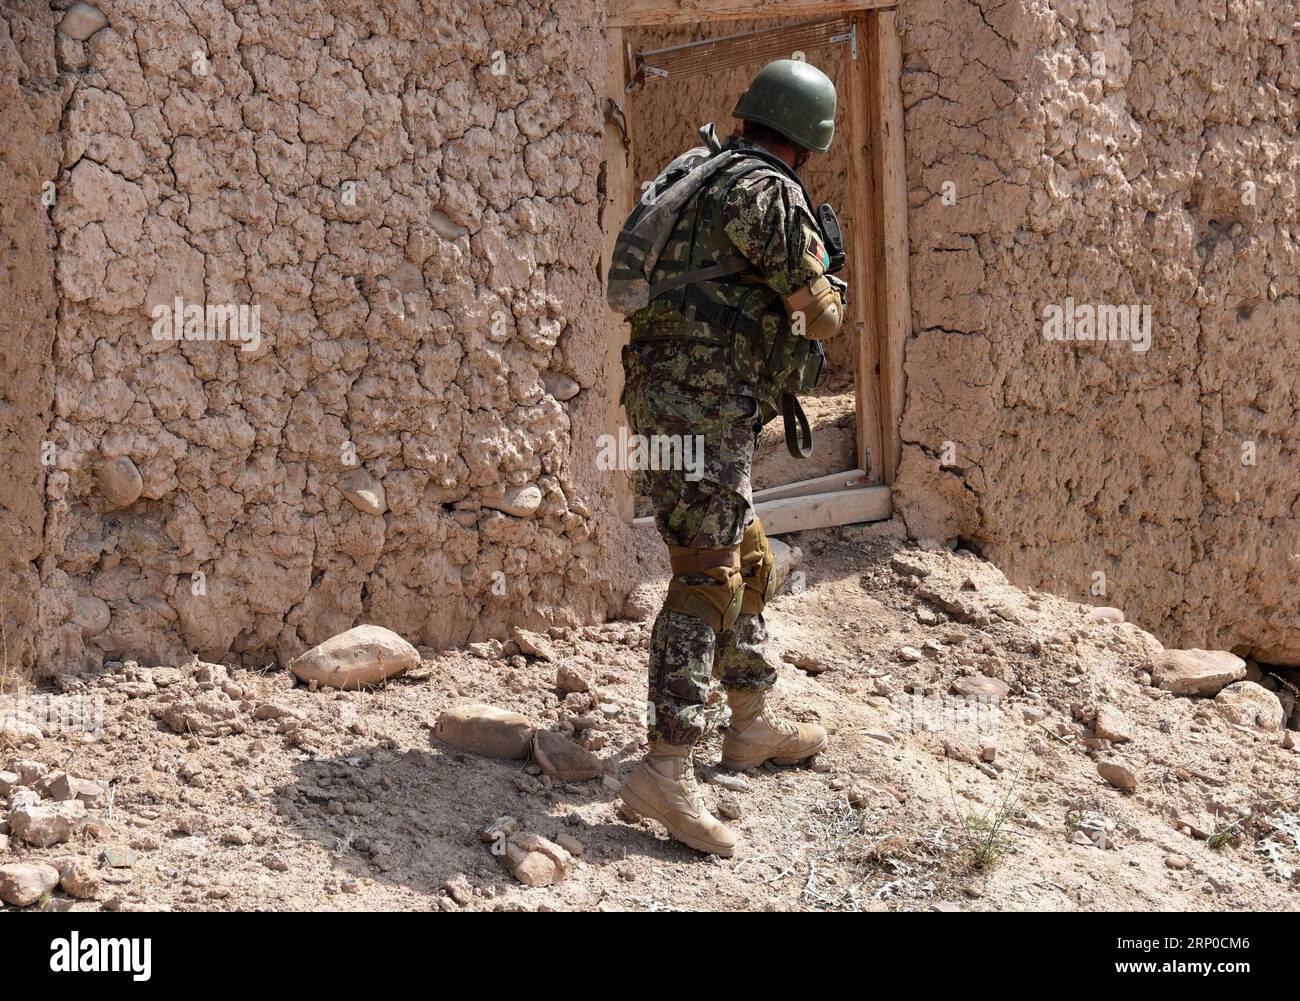 (180506) -- TIRIN KOT, May 6, 2018 -- An Afghan security force member takes part in a military operation in Tirin Kot, capital of Uruzgan province, Afghanistan, May 5, 2018. ) (wtc) AFGHANISTAN-URUZGAN-MILITARY OPERATION SanaullahxSeiam PUBLICATIONxNOTxINxCHN Stock Photo